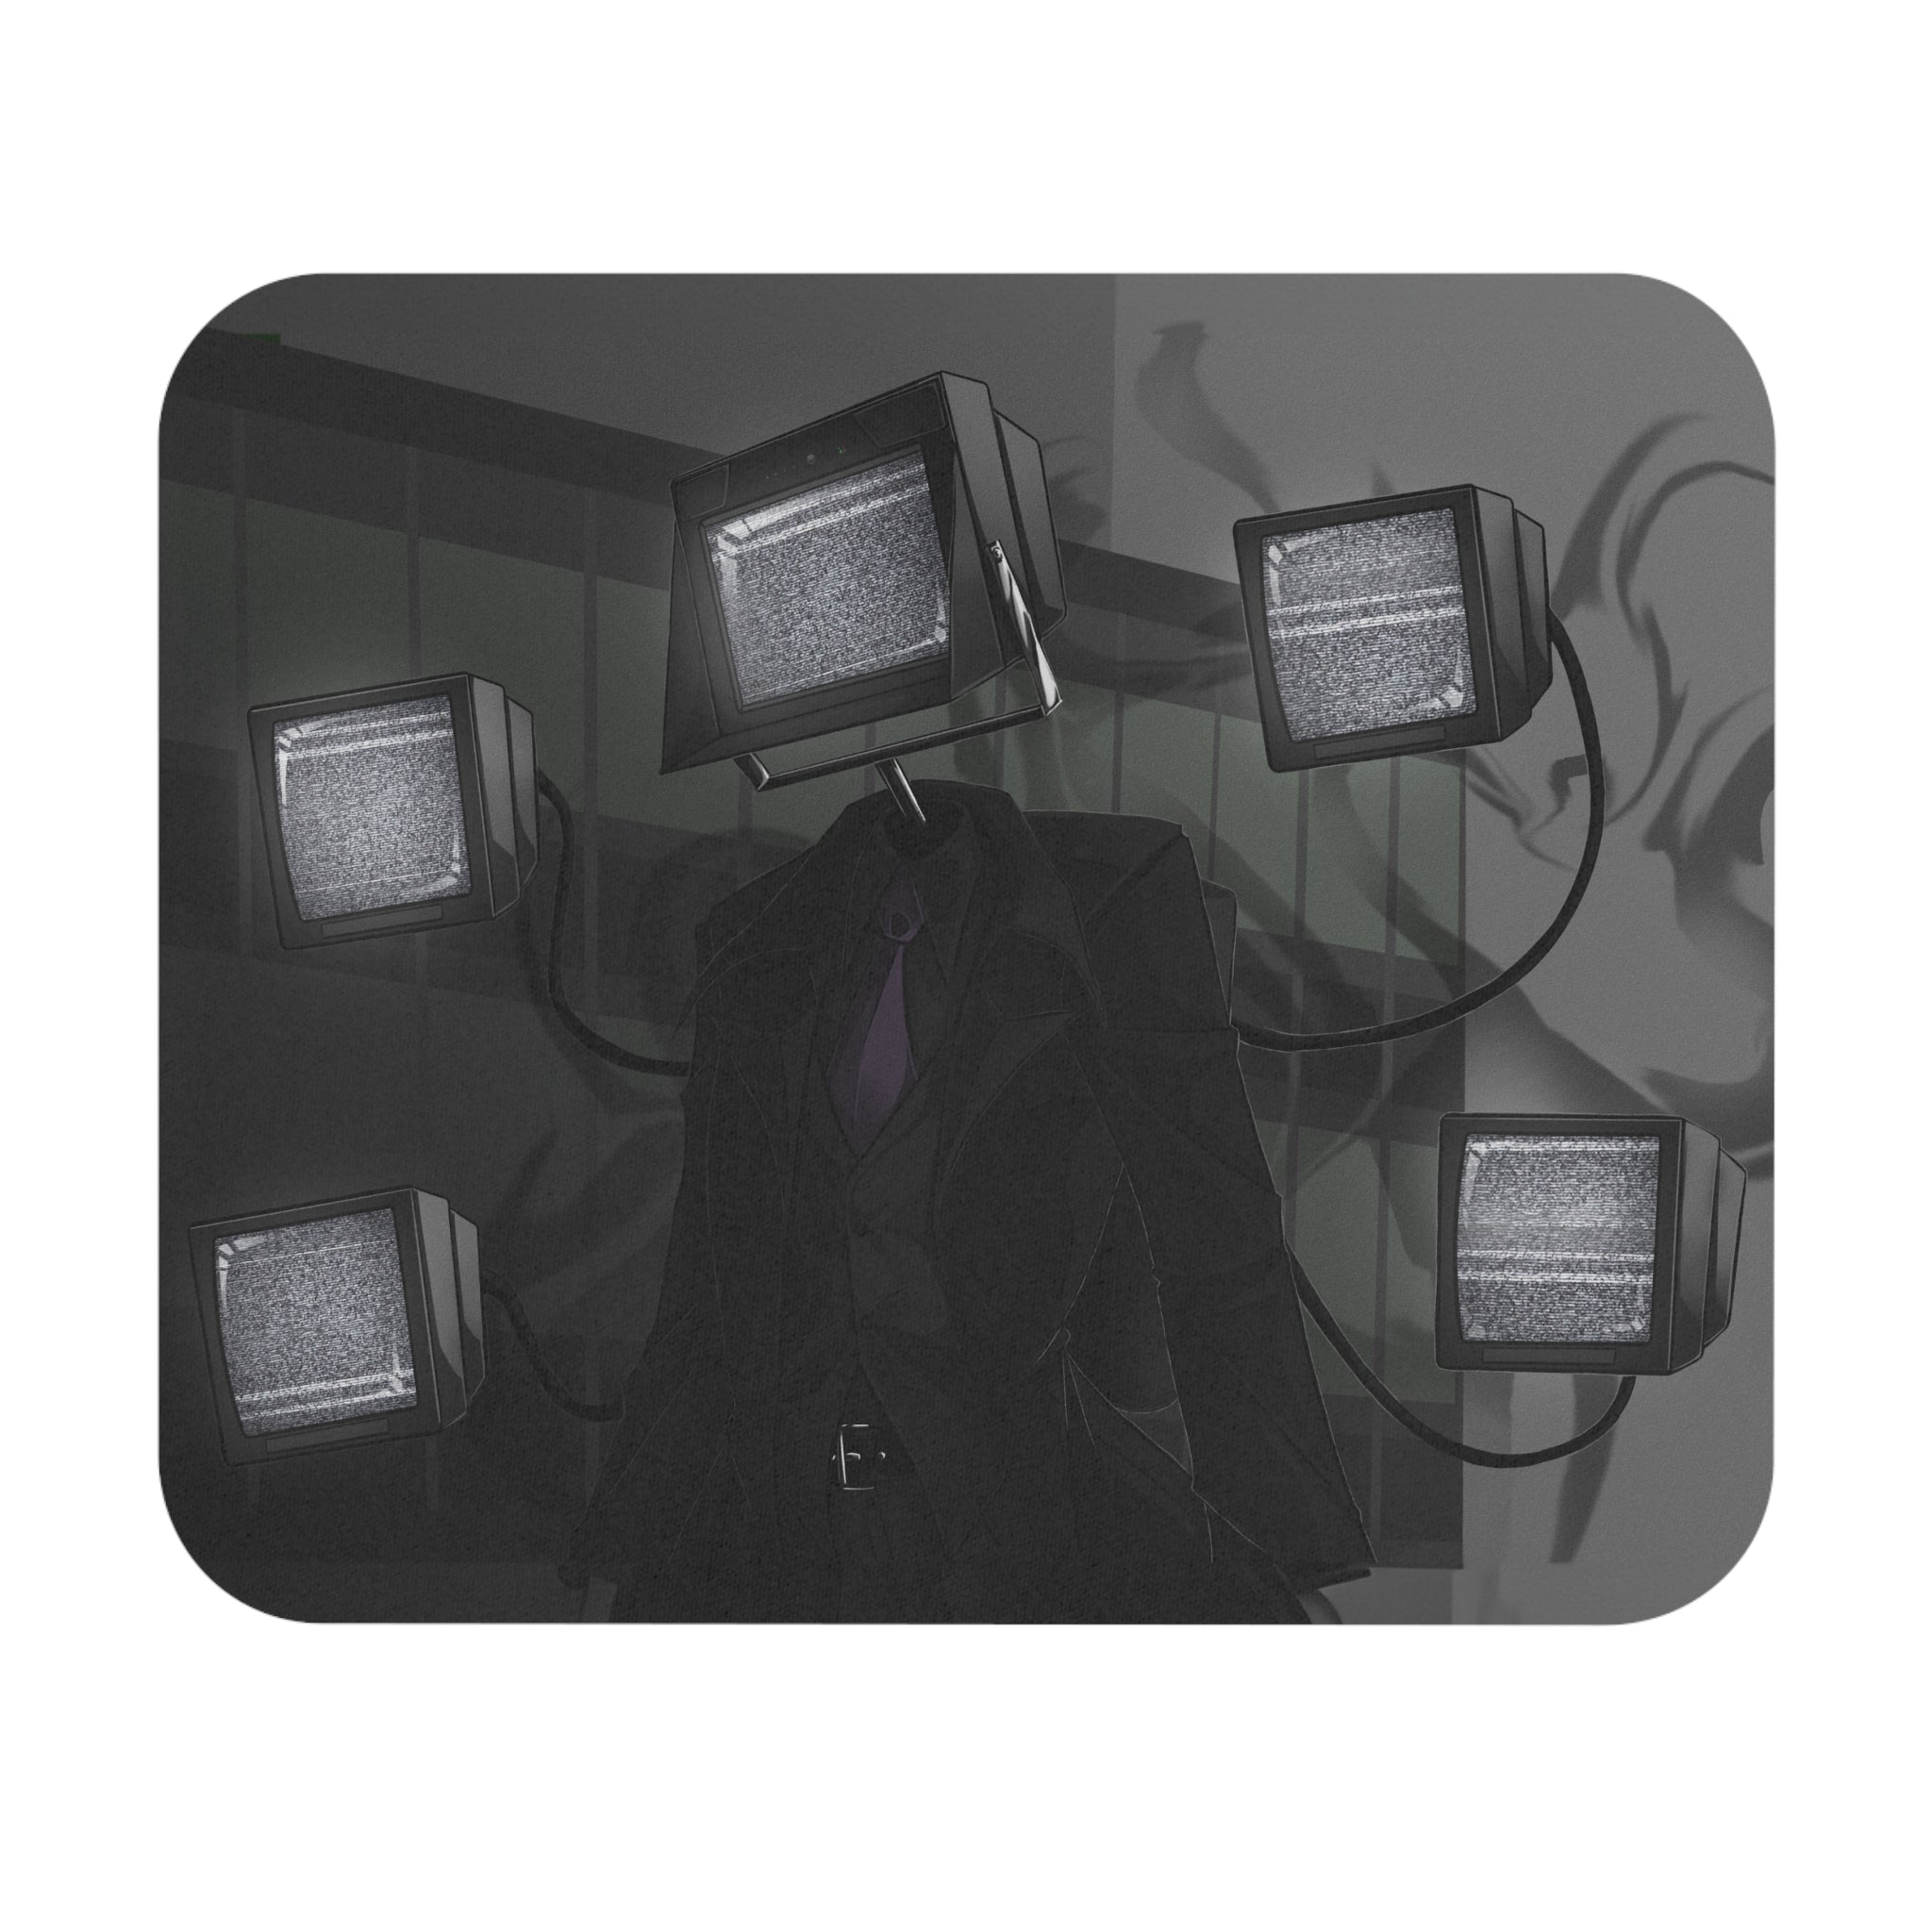 Mousepad featuring a cinematic scene of TV Man with multiple TVs